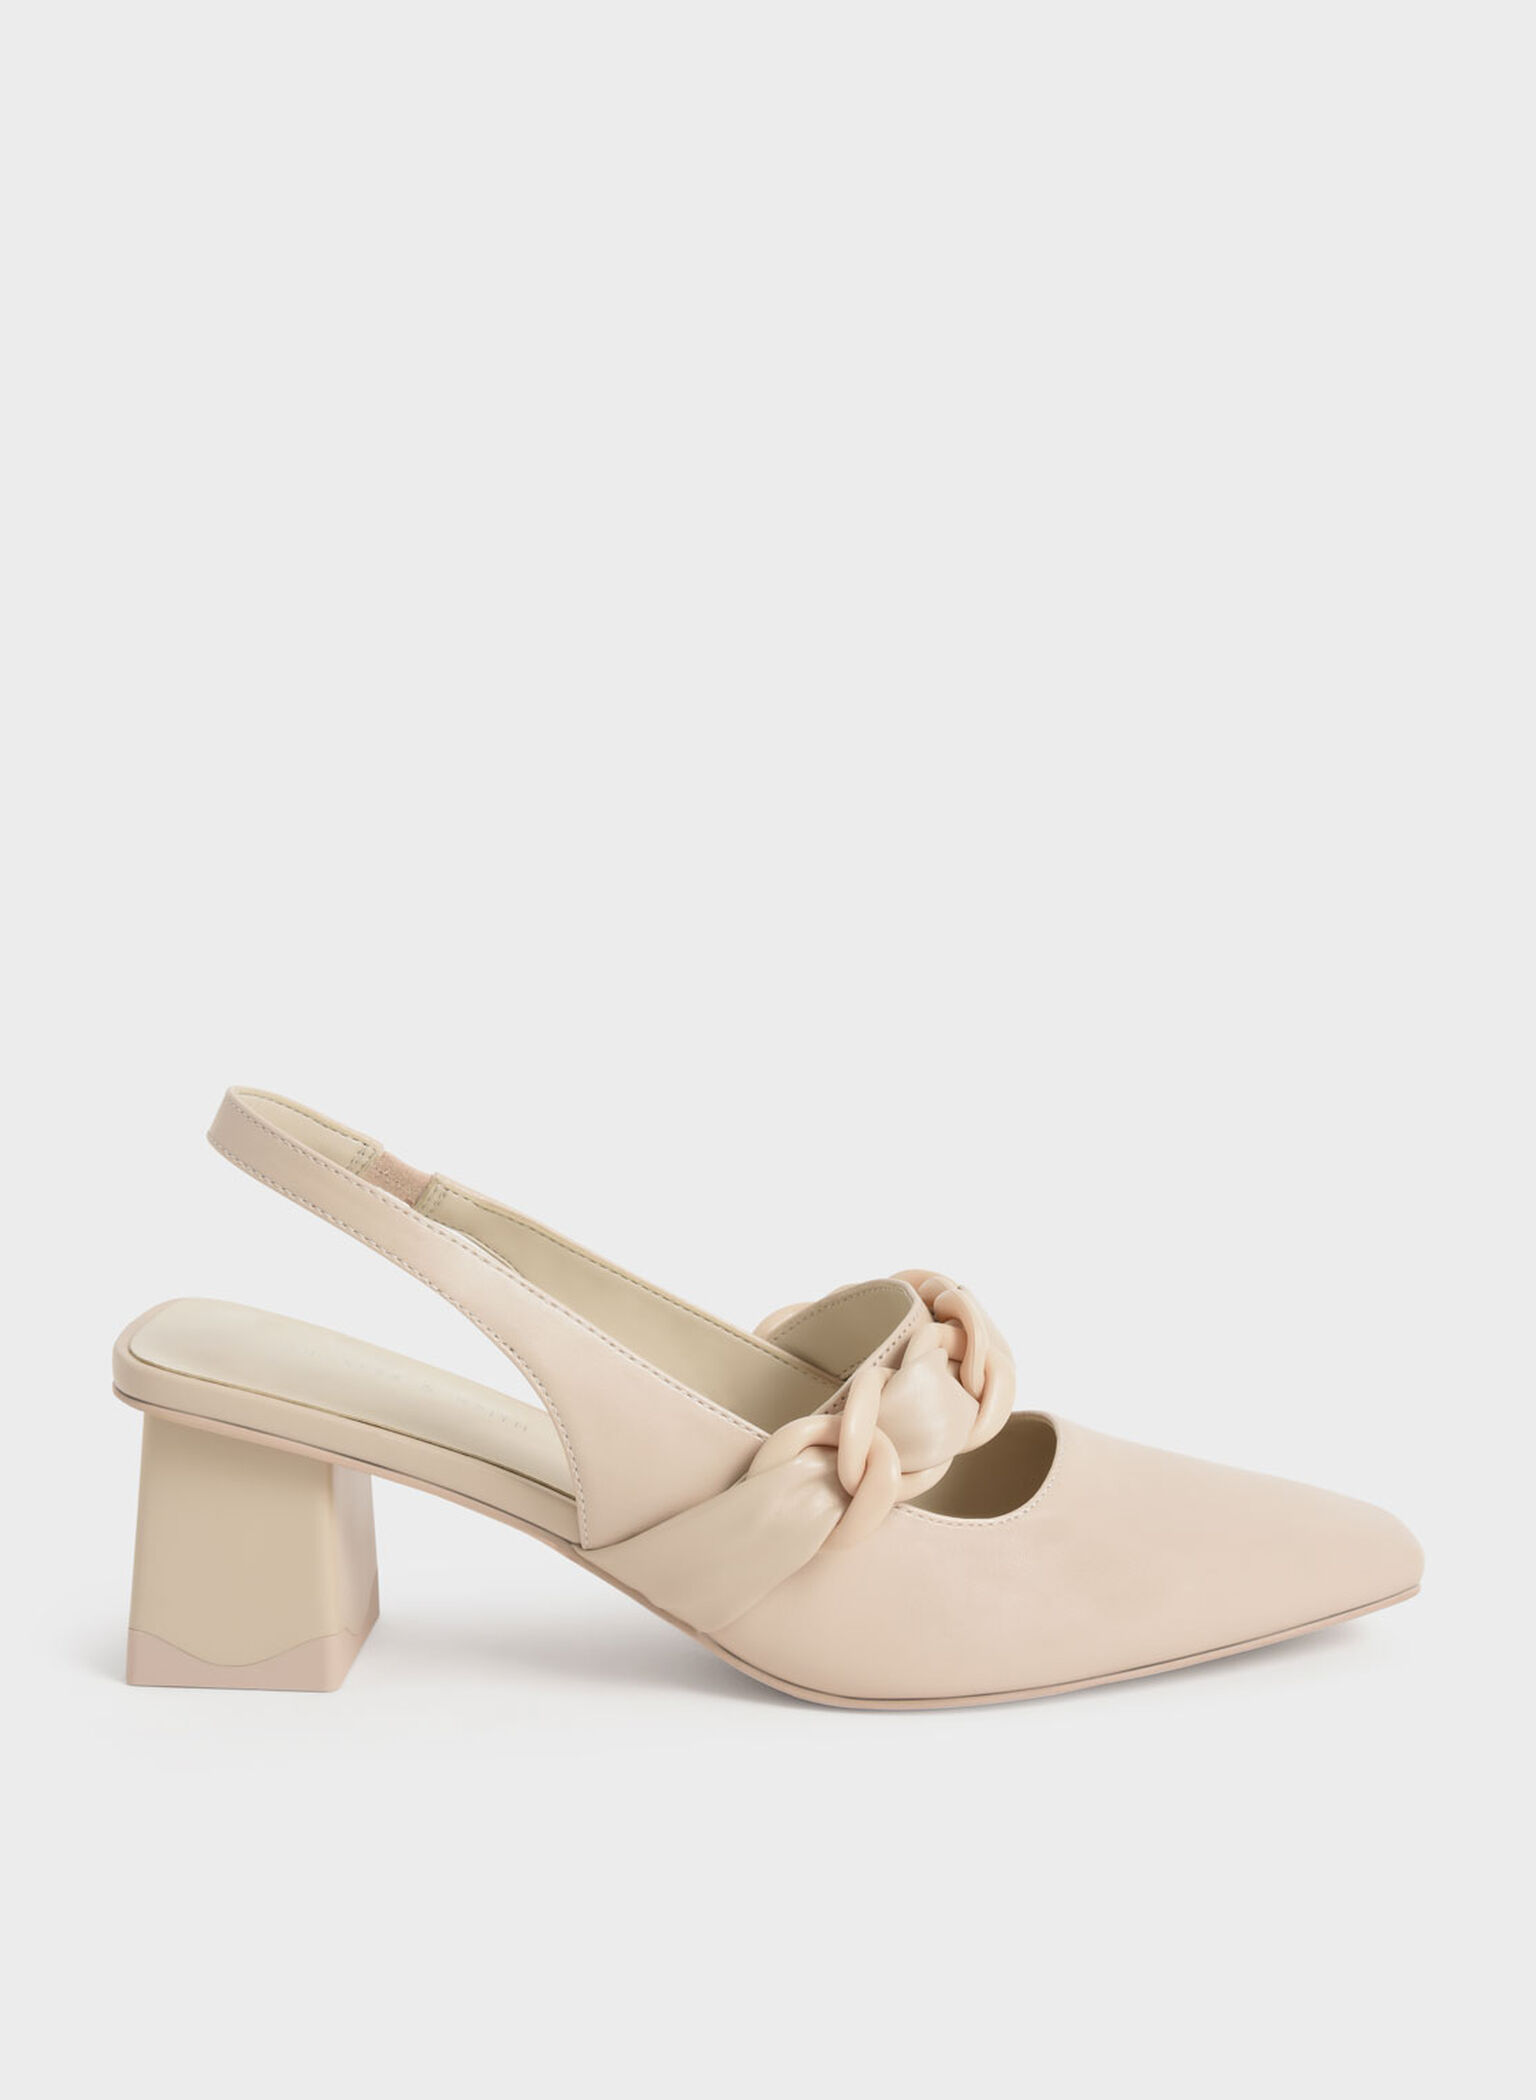 Chalk Braided Chain-Link Slingback Pumps - CHARLES & KEITH CA